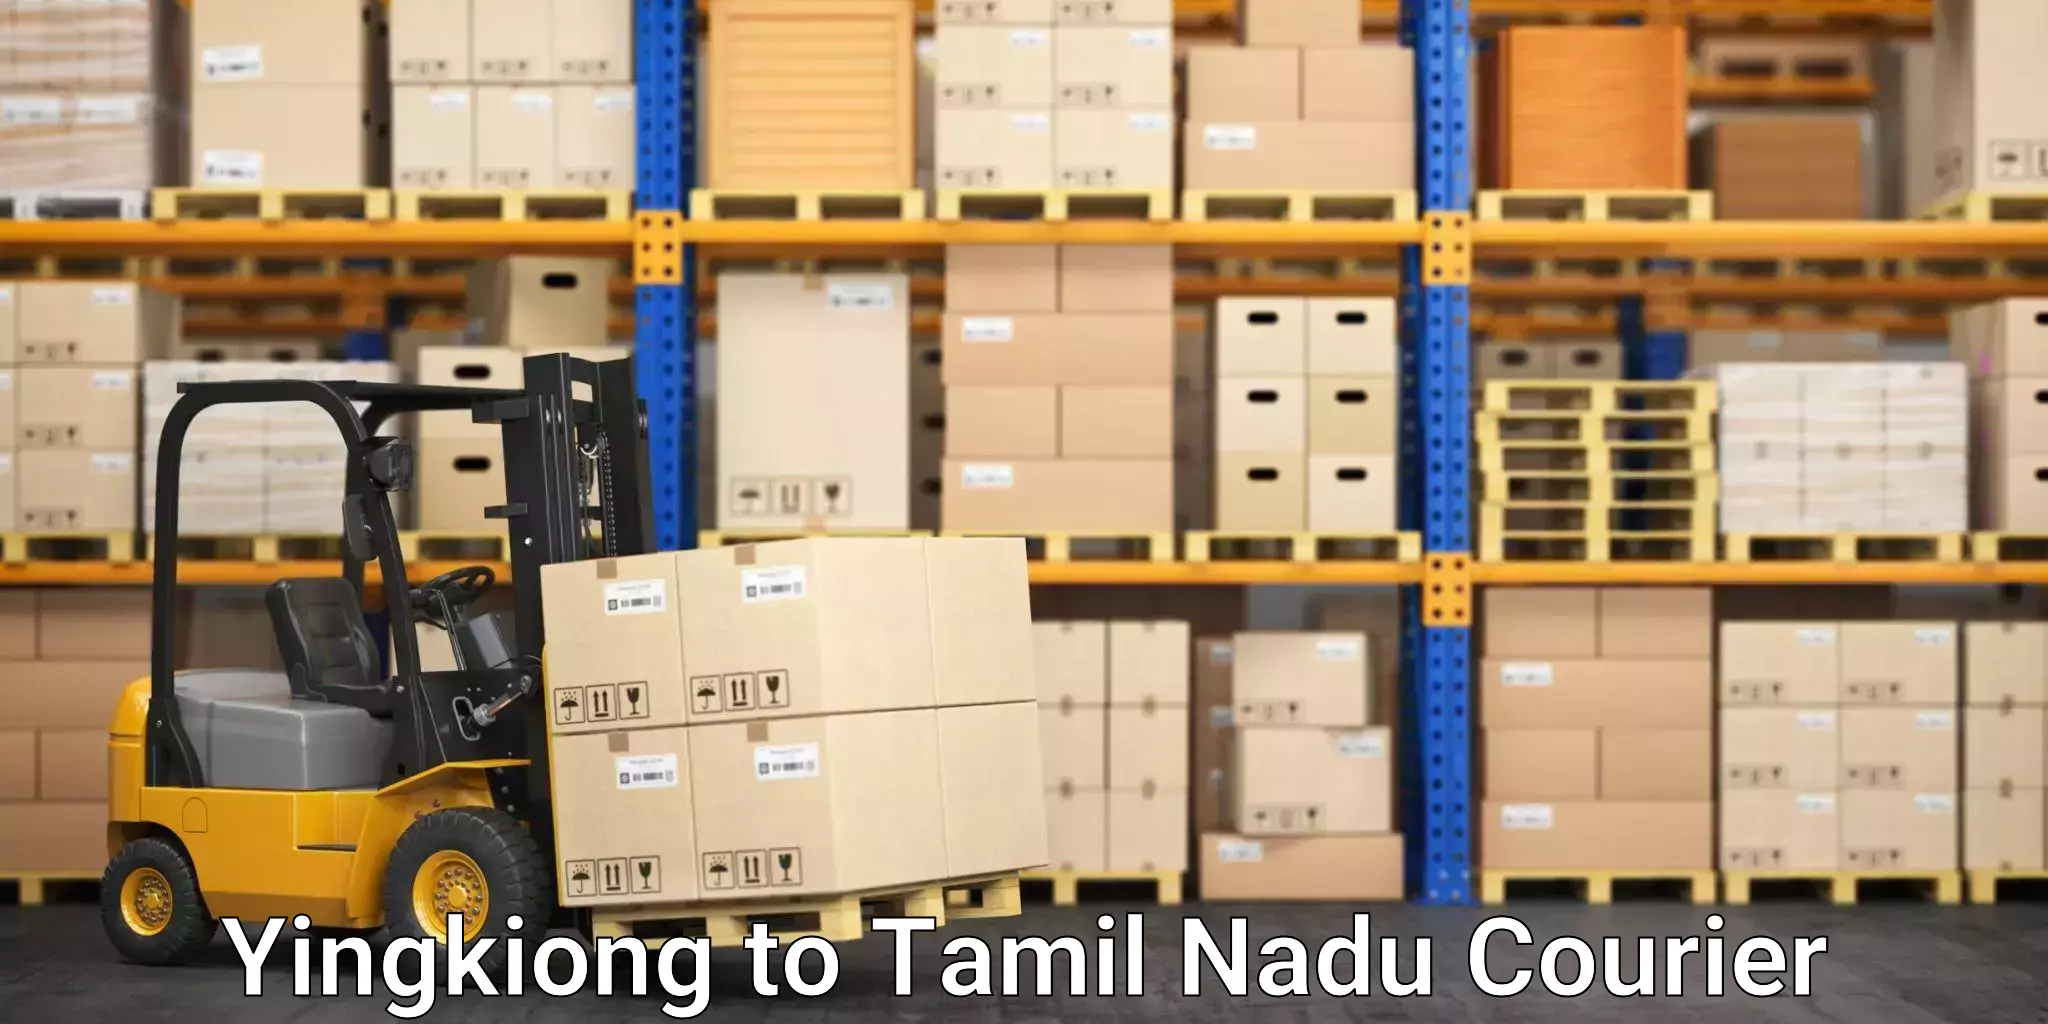 Reliable freight solutions Yingkiong to Tamil Nadu